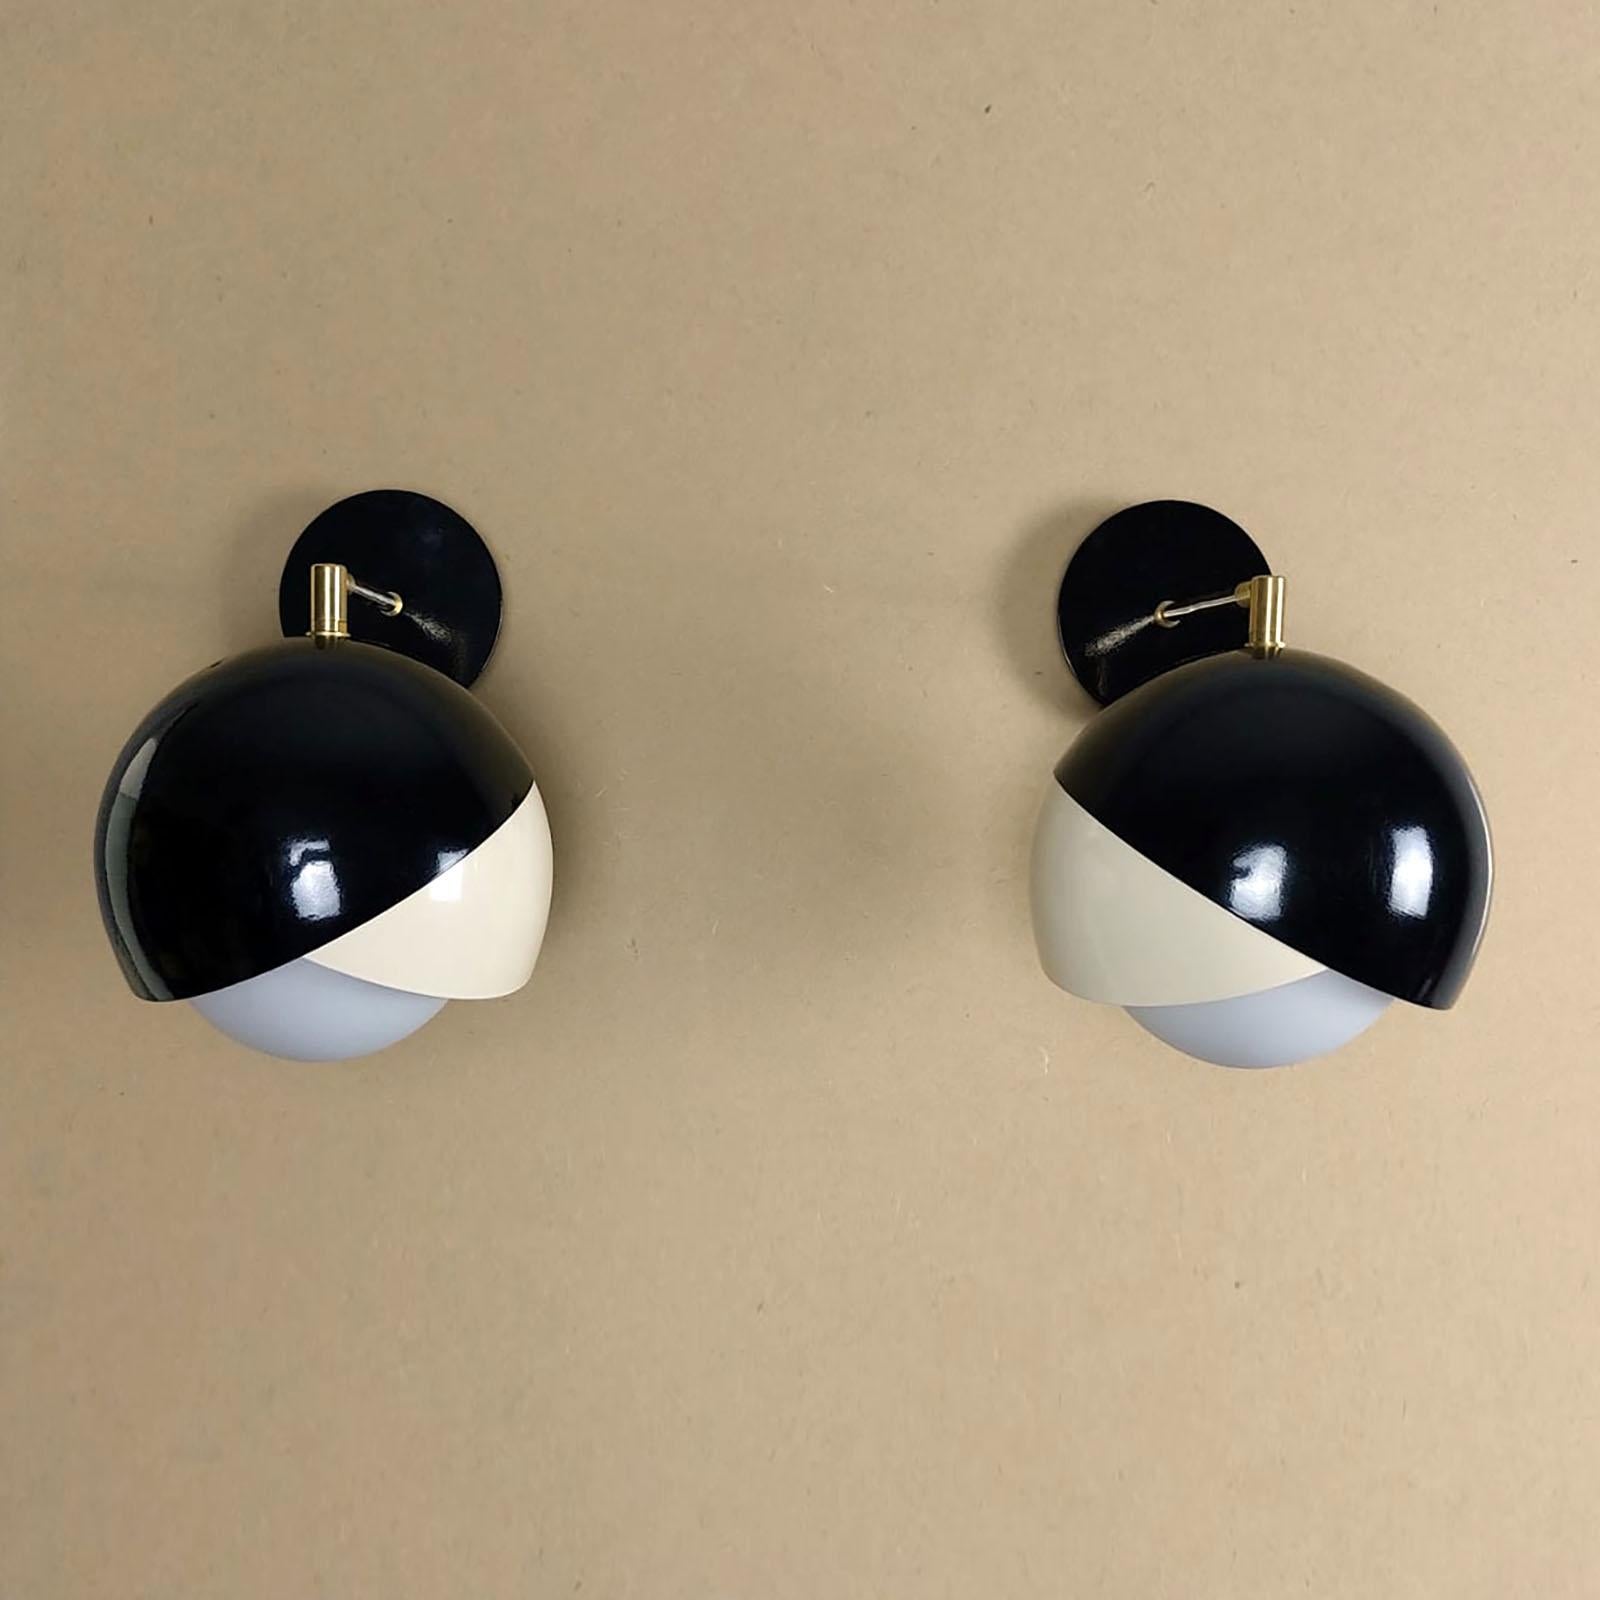 Lovely pair of adjustable wall lights, in light ivory and black lacquer, shaped as stylized blossom, with a round satined glass globe in the middle, covering the light base.
E14 light base for a max 60W bulb, on request we can replace it with E12